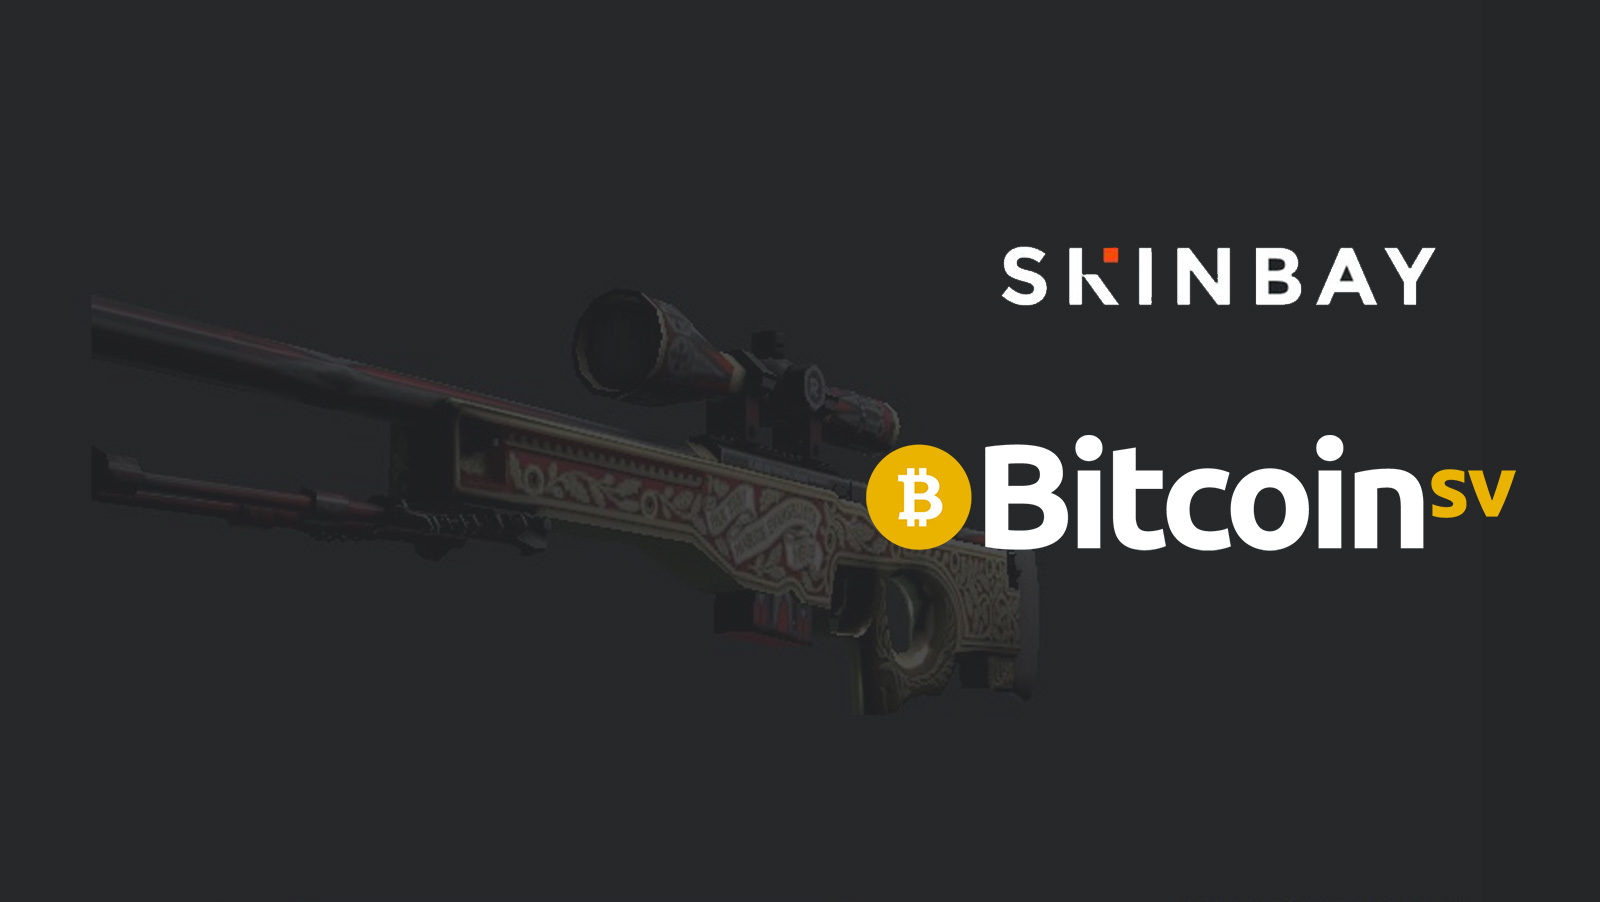 skinbay-sees-esports-players-trade-skins-in-bitcoin-sv